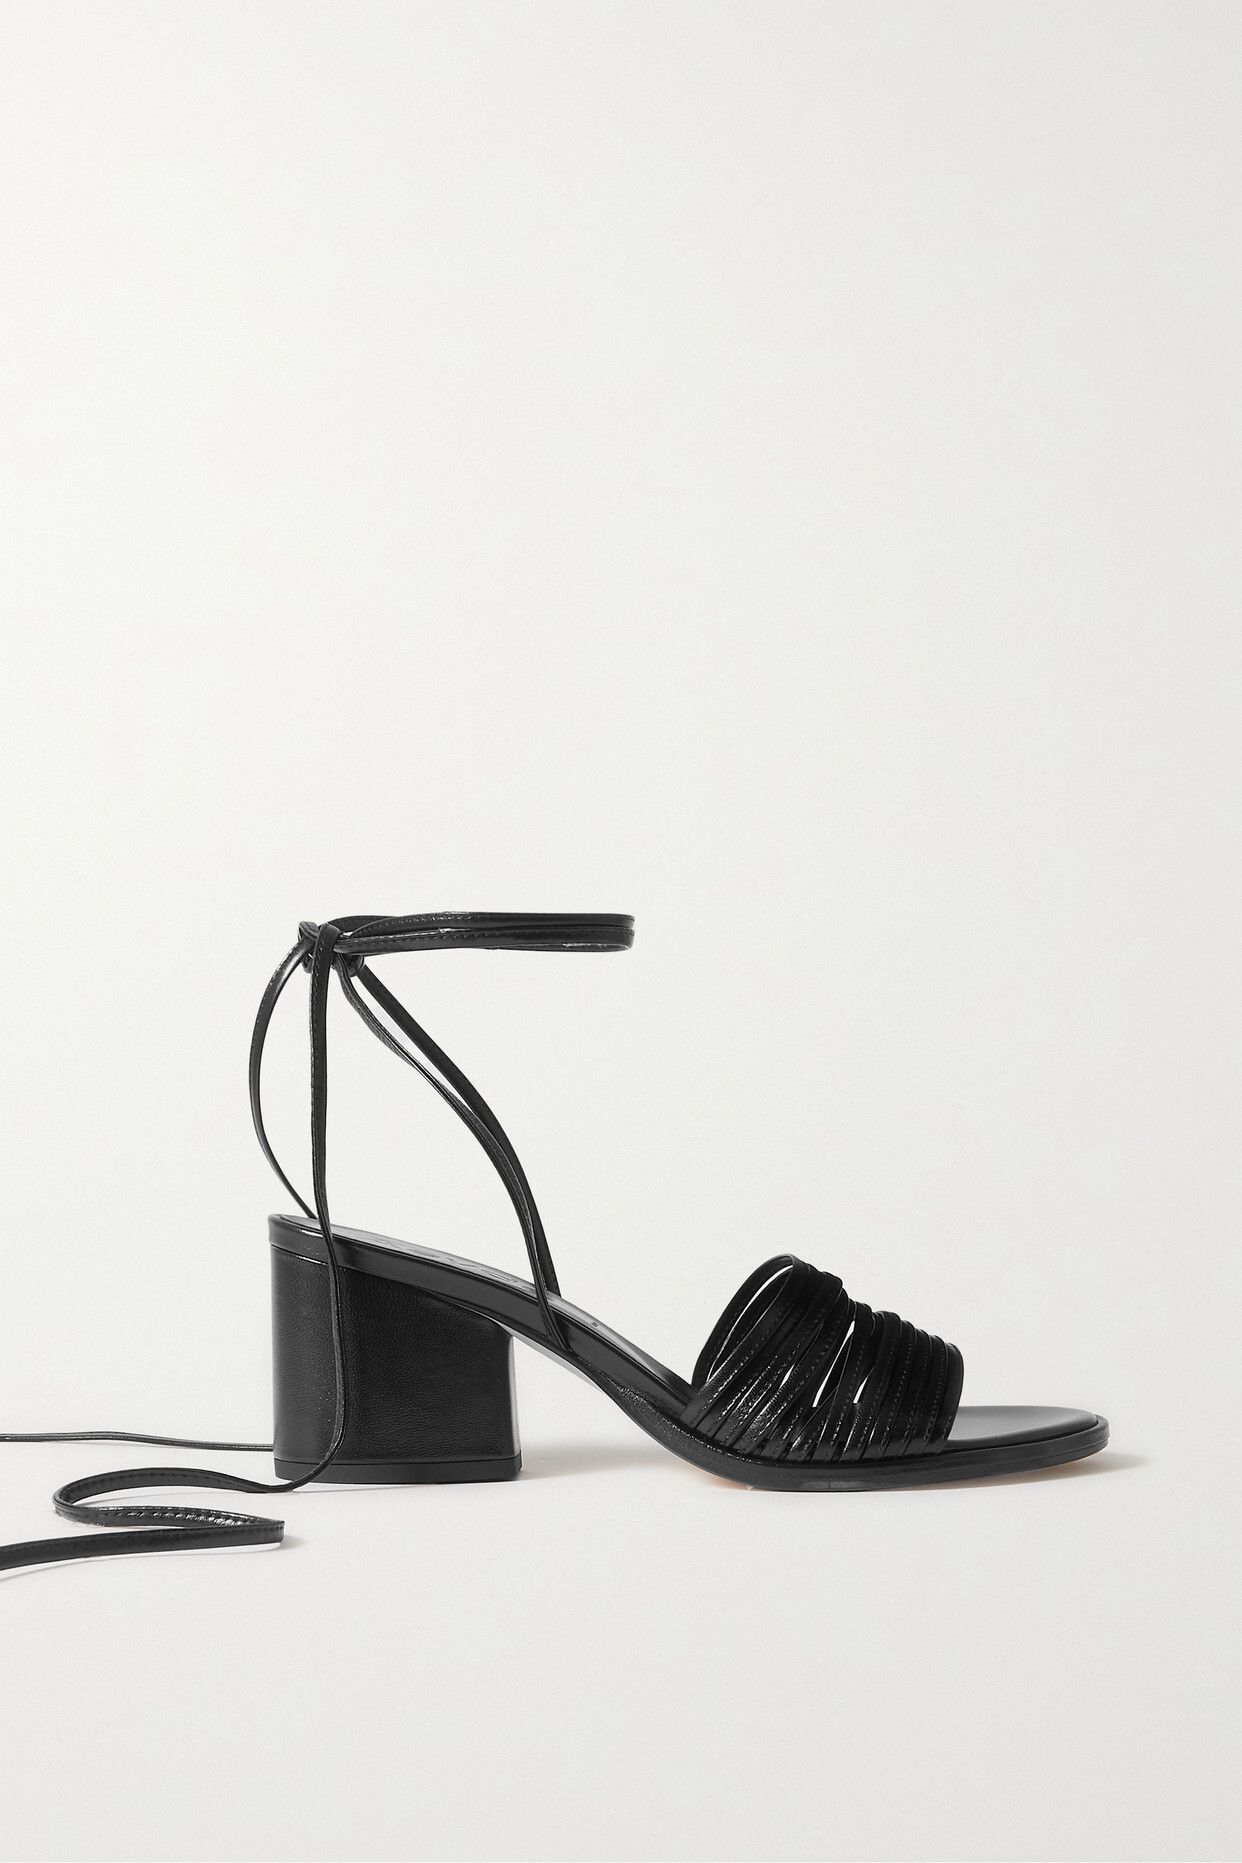 aeyde - Natania Leather Sandals - Black